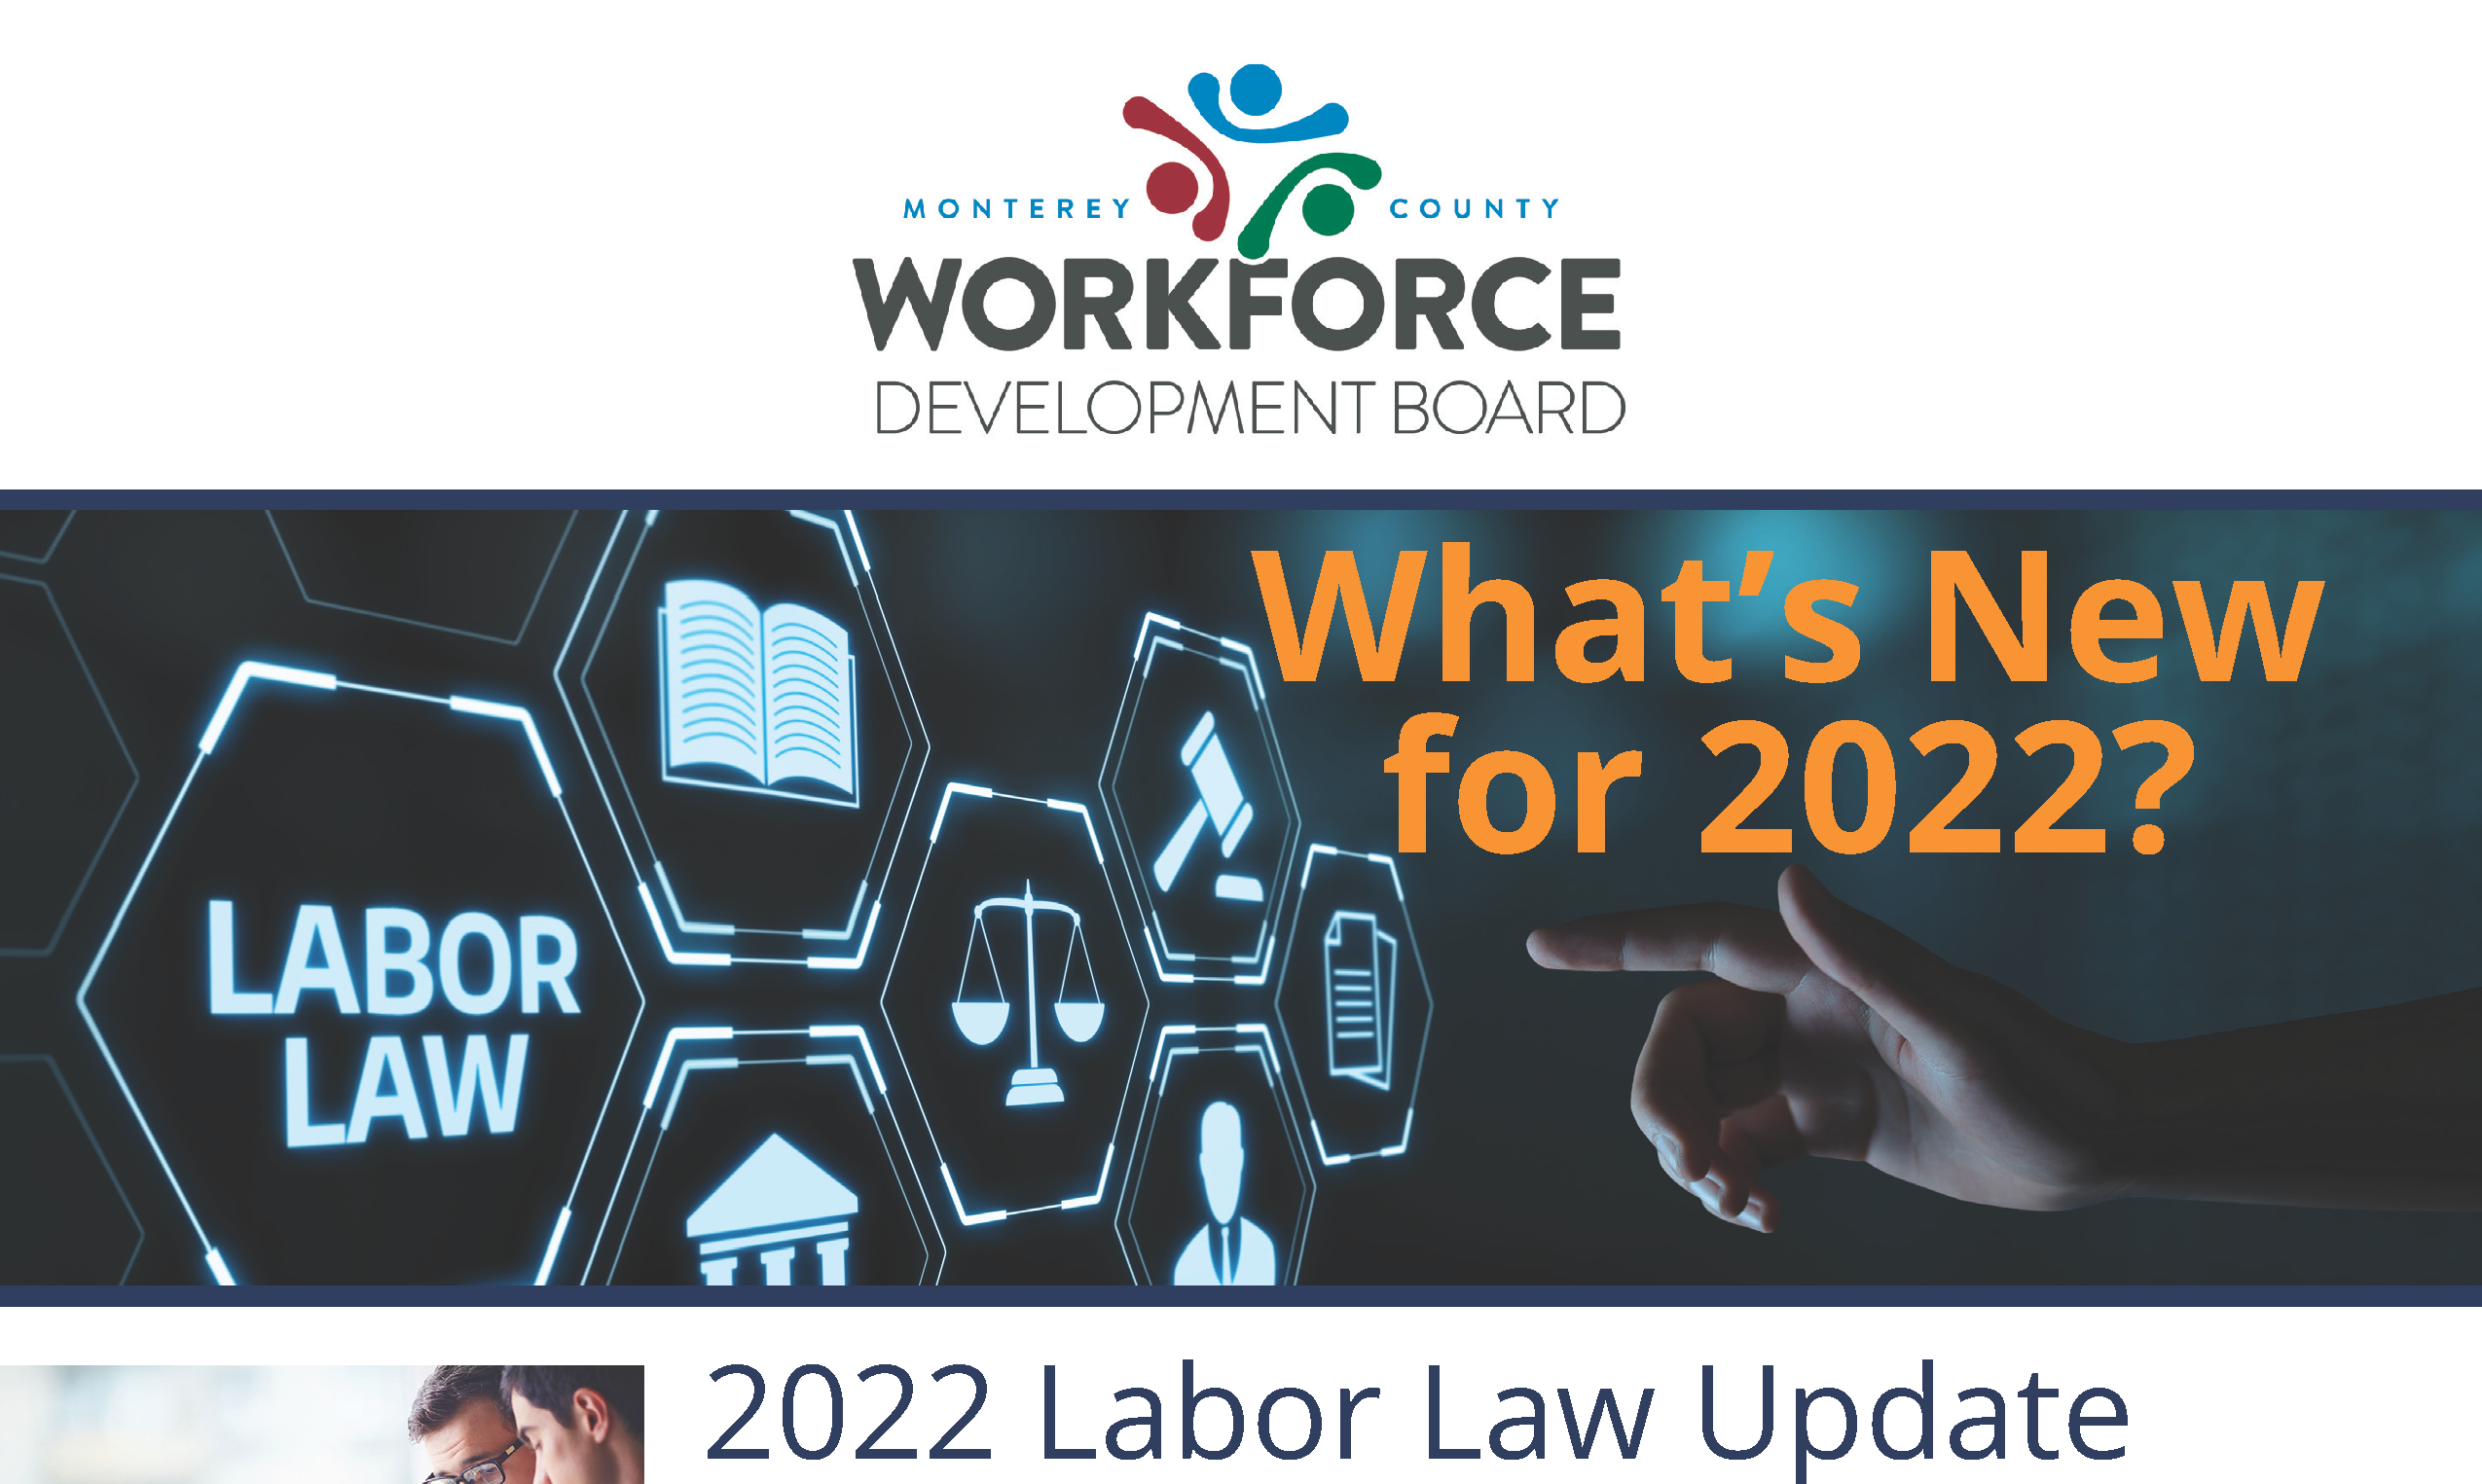 labor law update what's new for 2022